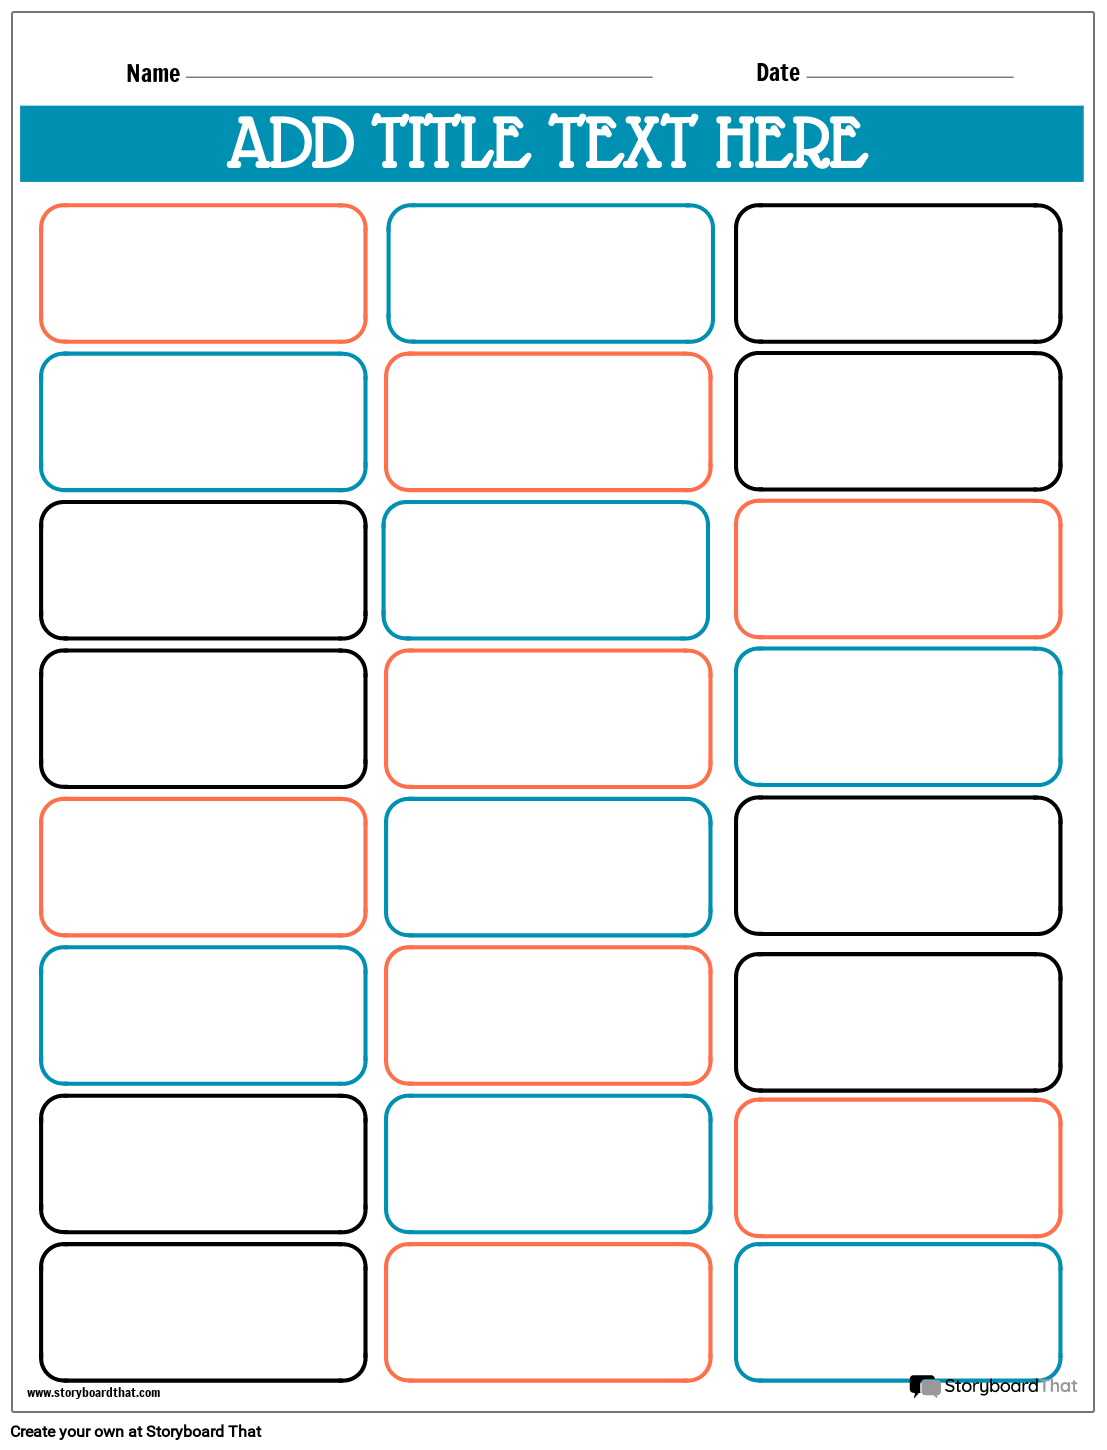 Table Worksheet Design with Colorful Boxes